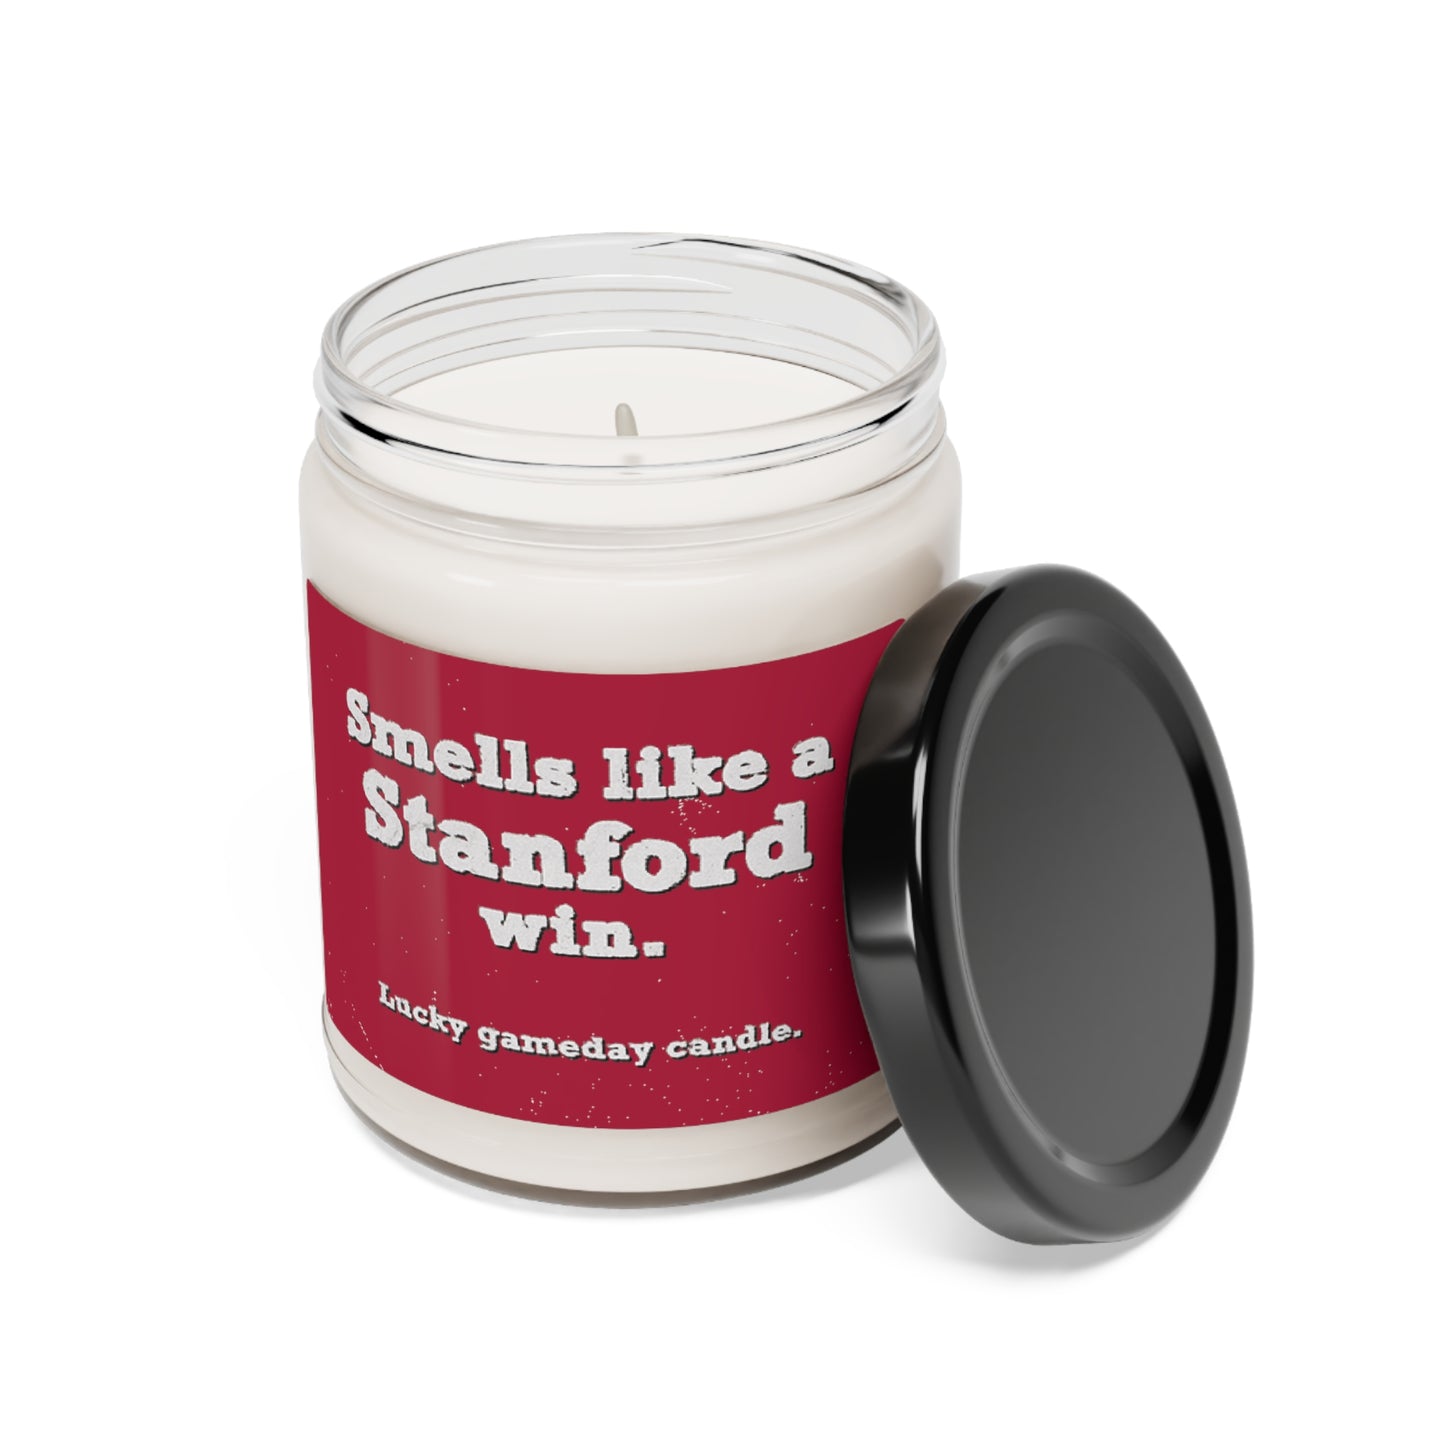 Stanford - "Smells Like an Stanford Win" Scented Candle